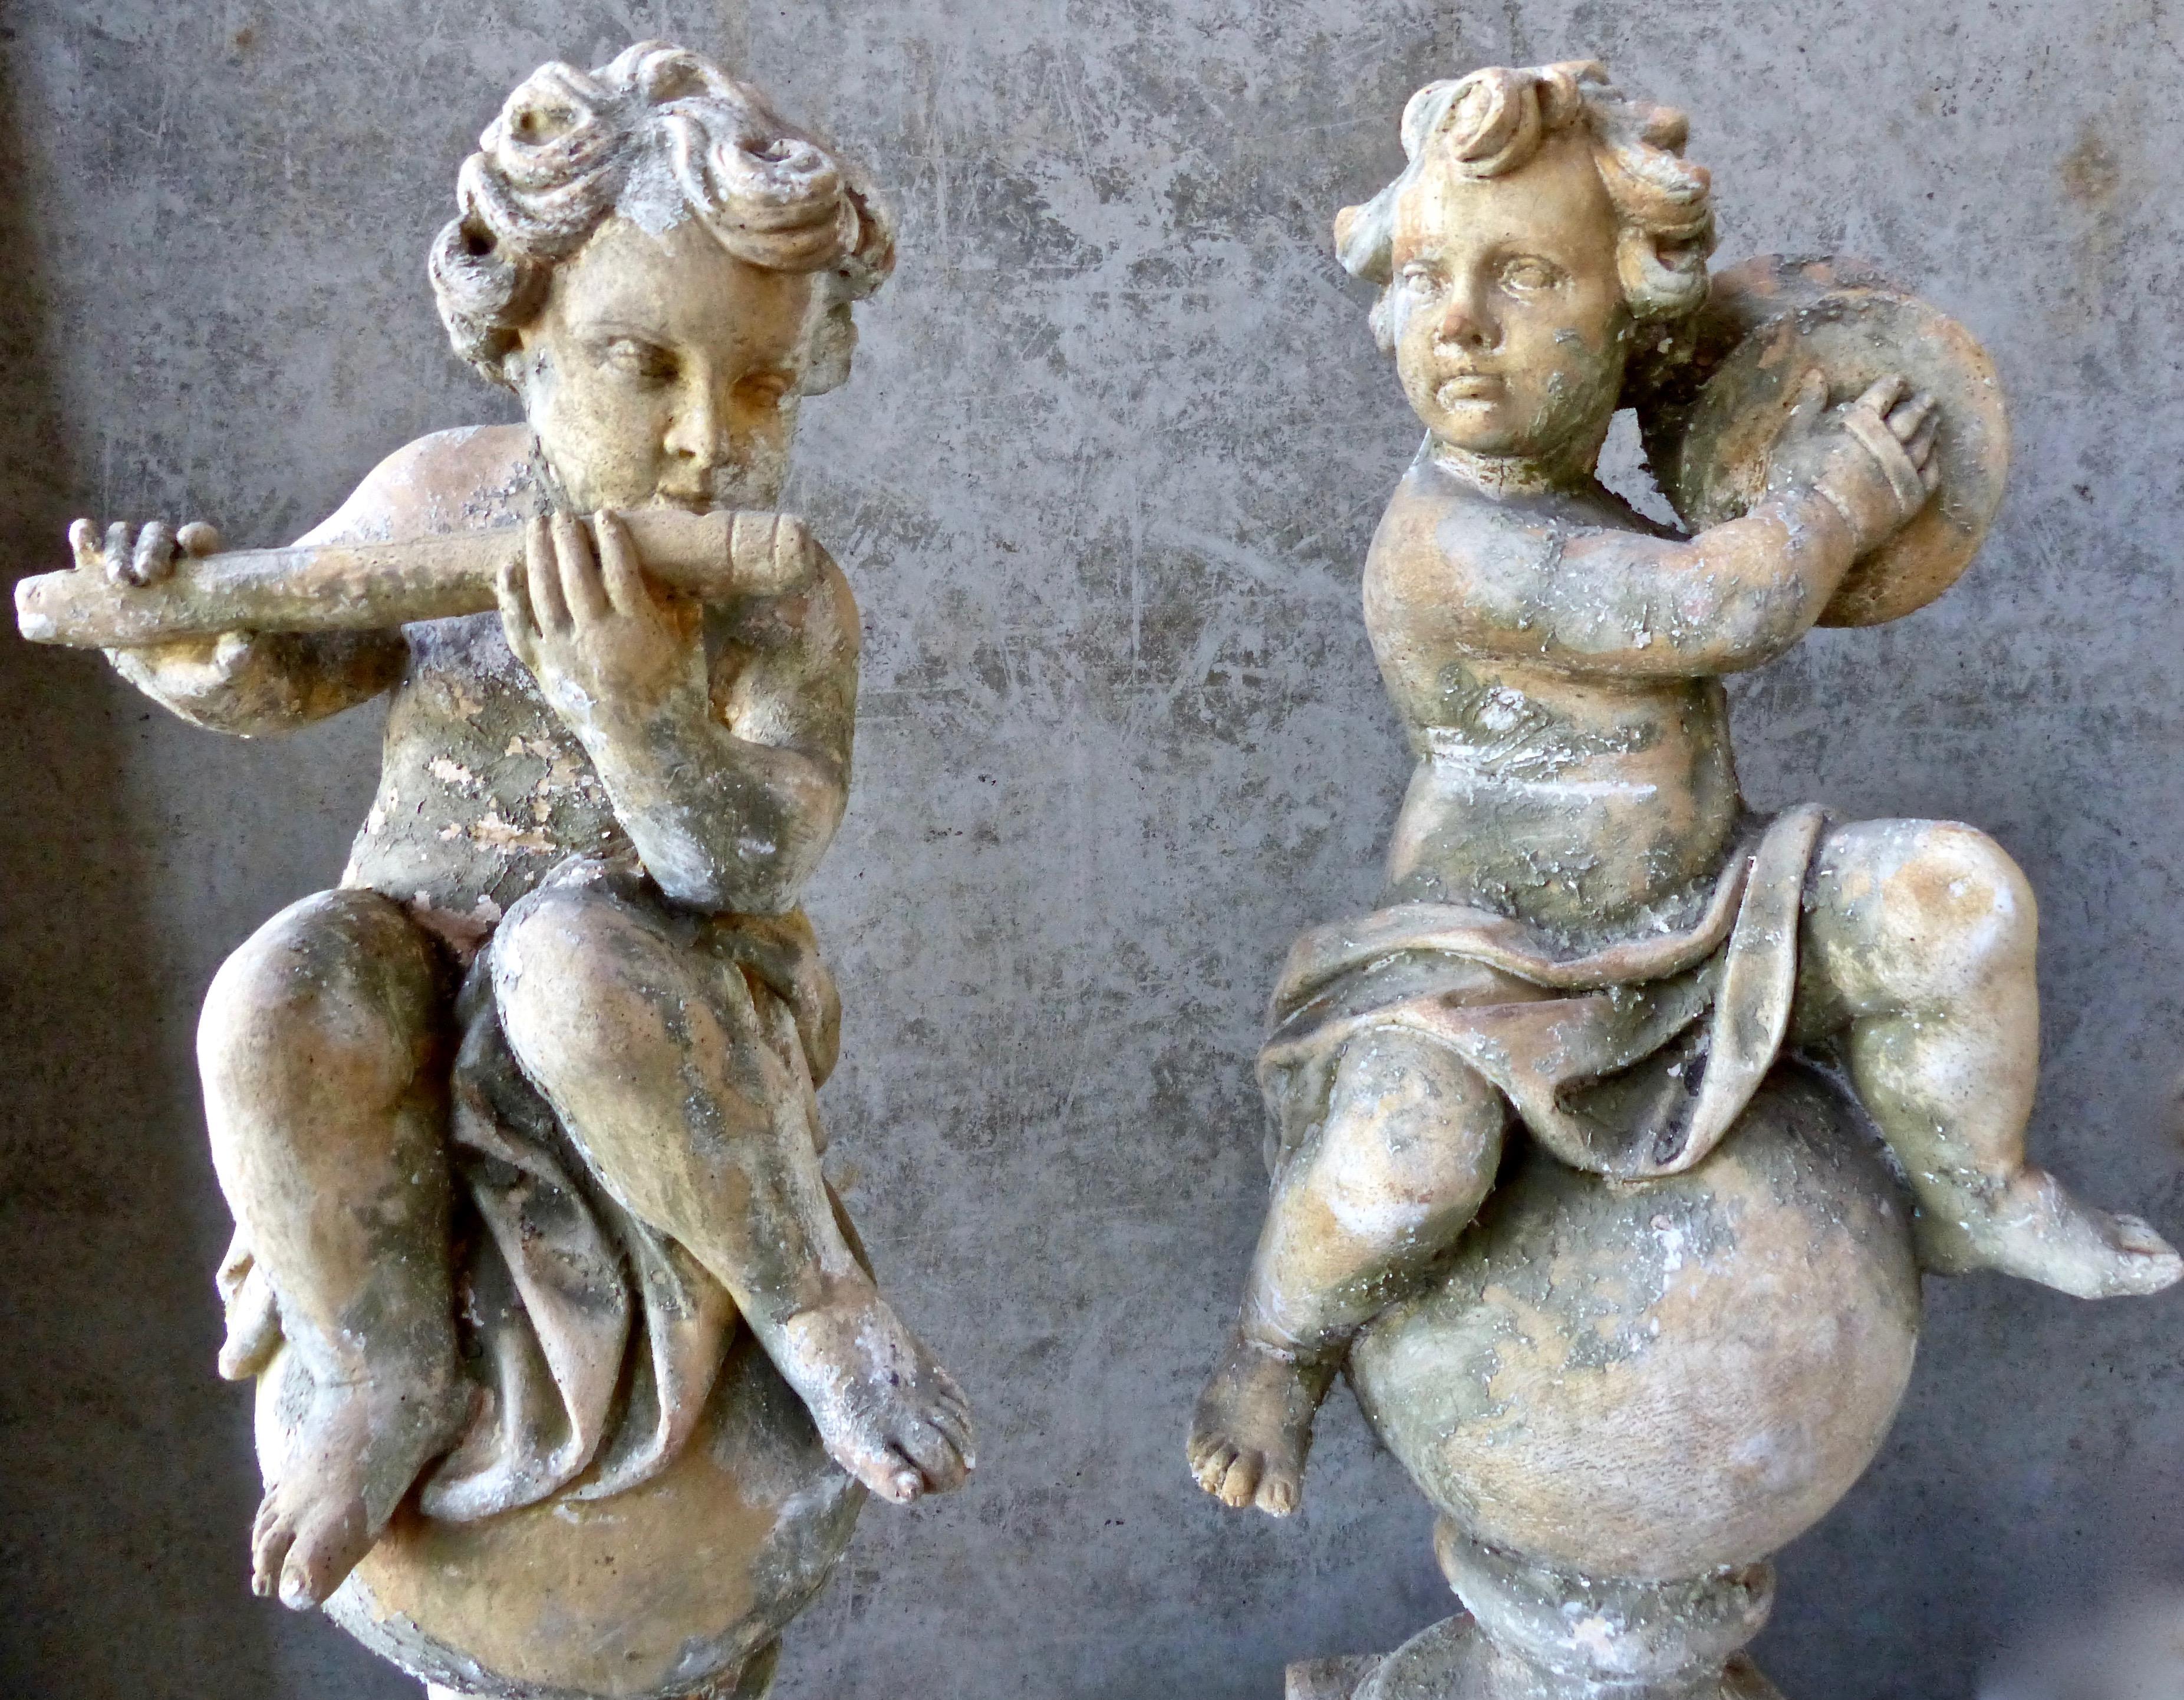 Rare set of four French hand-cast cherubs playing musical instruments: flute, cymbals, tambourine, and lute. Each member of this angelic quartet has it’s own matching but separate base. Charming and unique sculptures for that special garden.